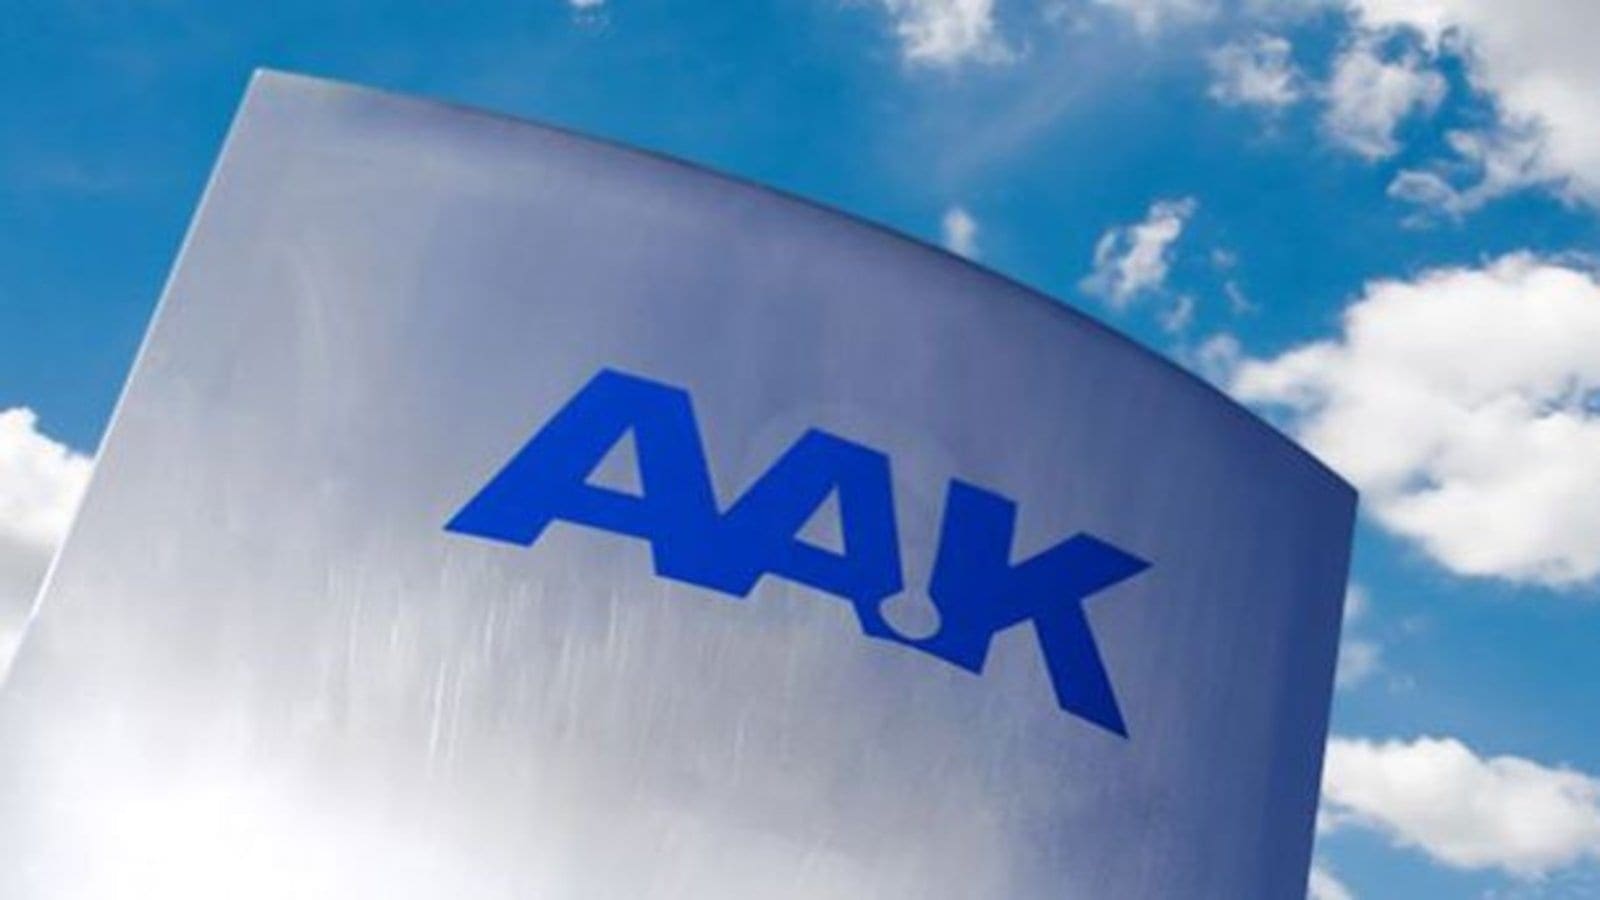 Vegetable Fat and Oil company AAK achieves 100% ownership of Indian subsidiary